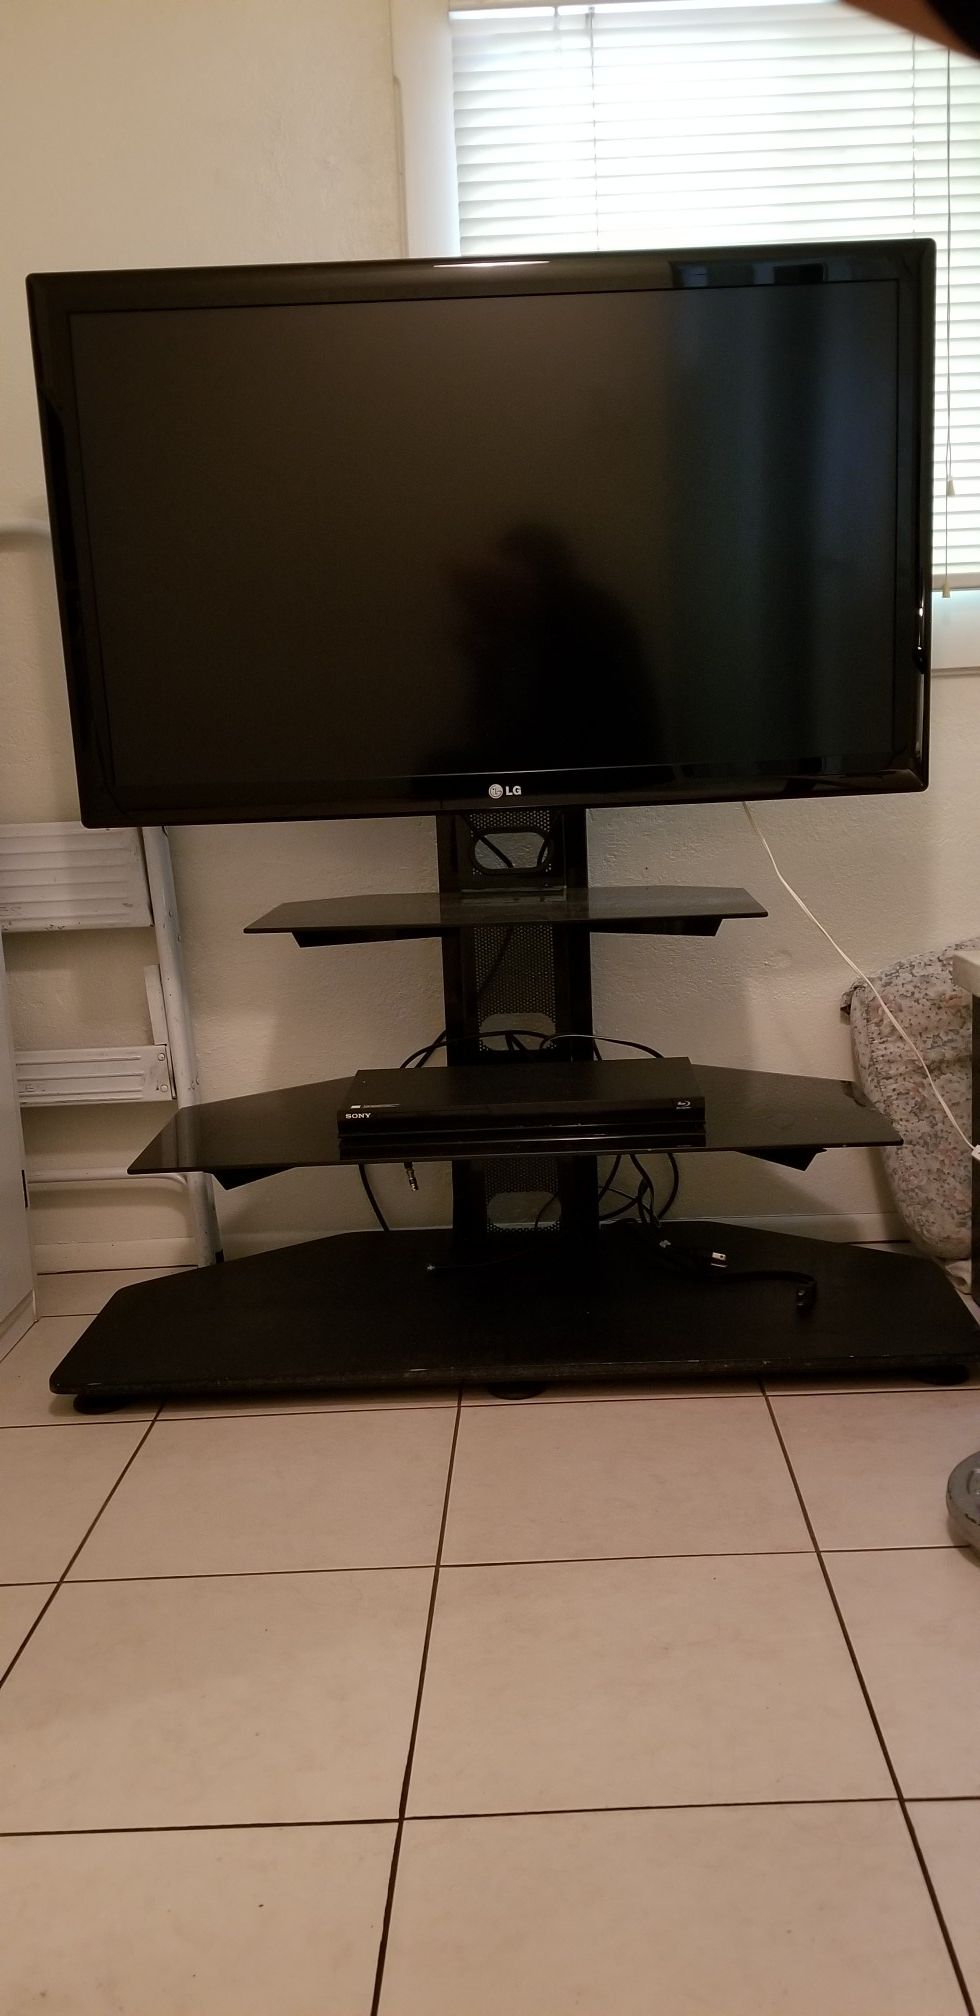 LG LED TV and stand furniture